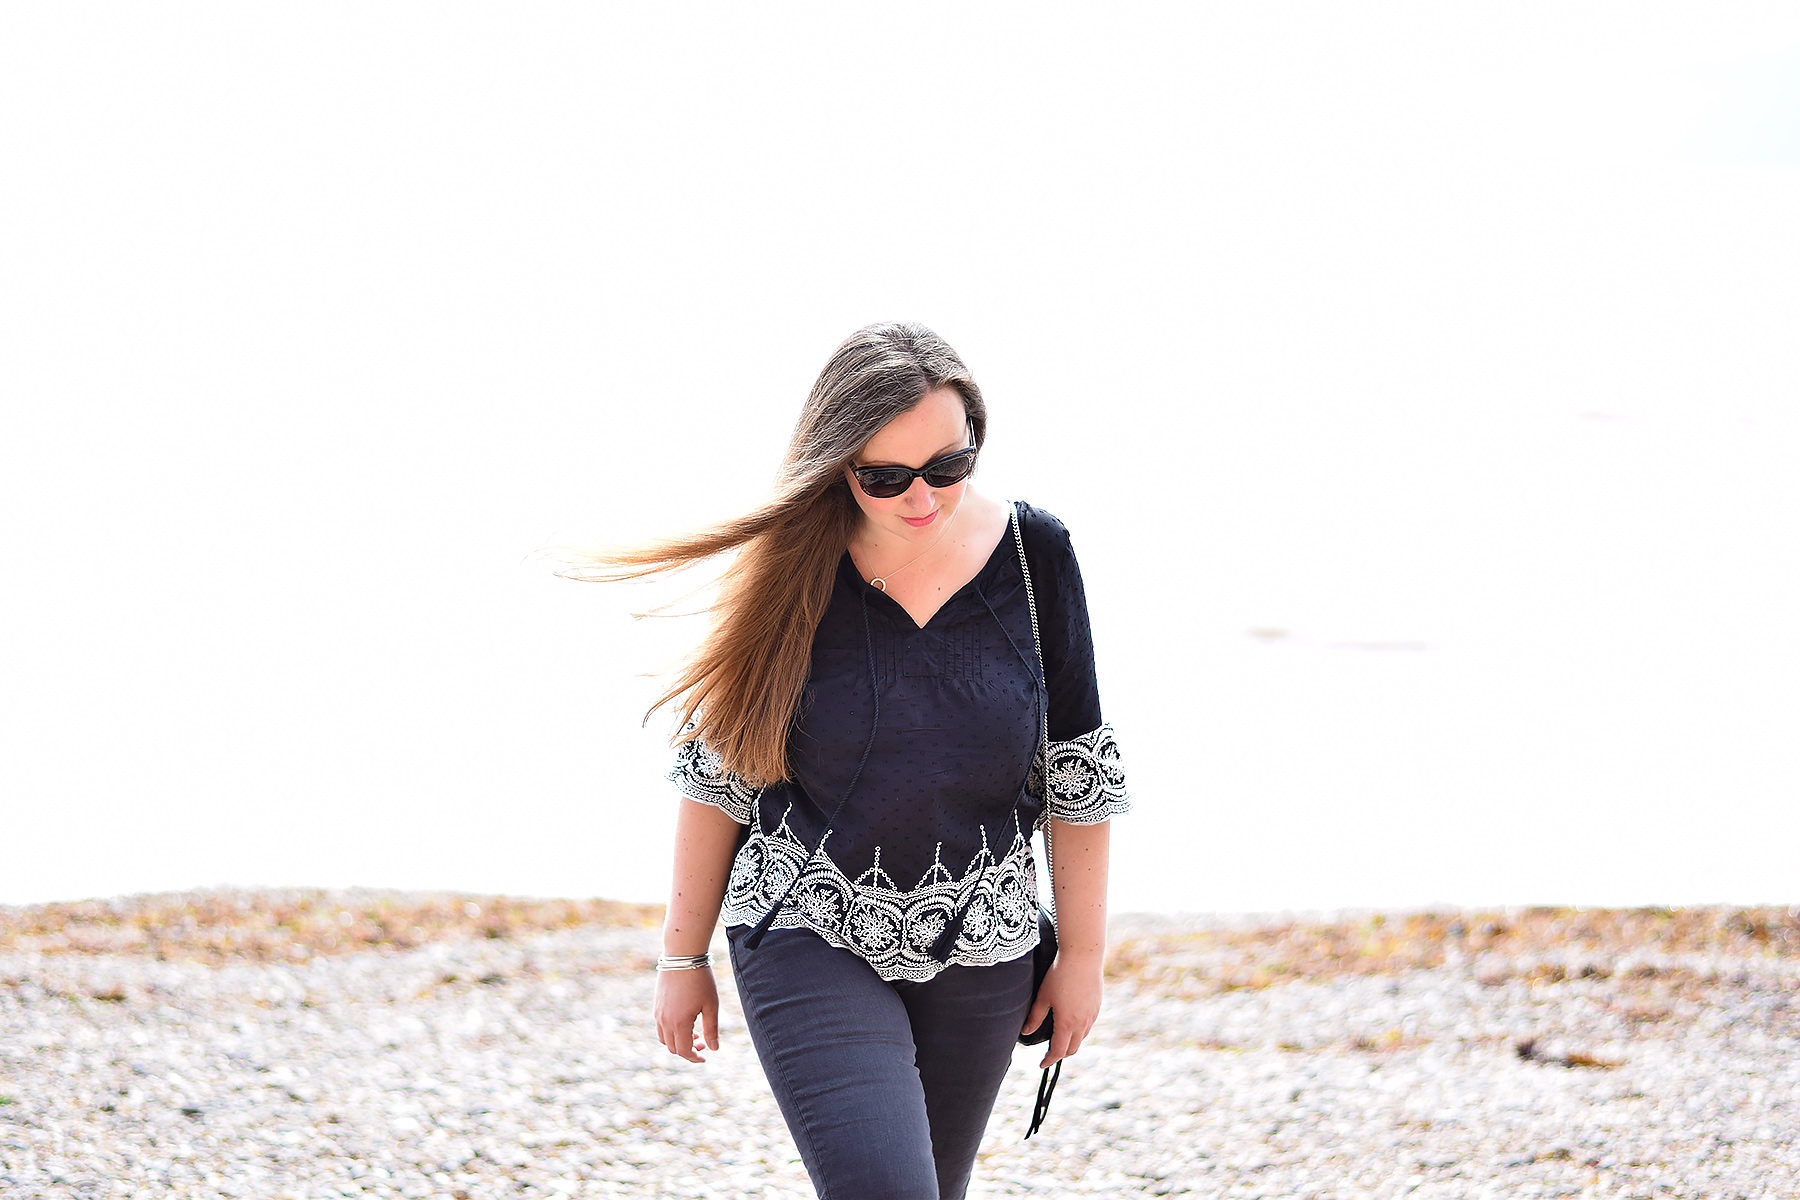 Having a walk on the beach in a black and white embroidered coverup